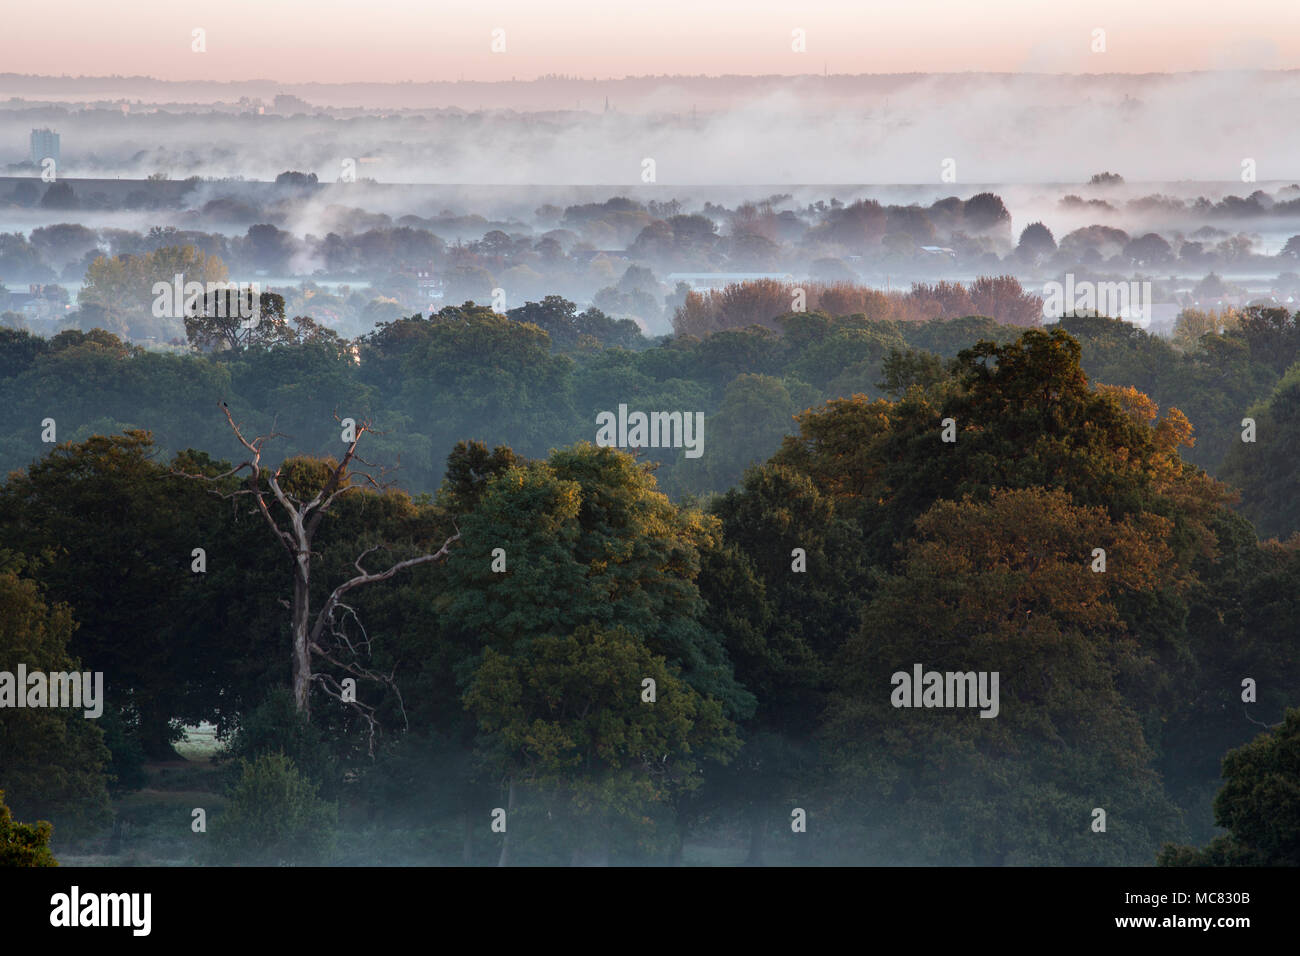 Early Morning Mist laying over Windsor Great Park near Windsor Castle in Berkshire England. Stock Photo